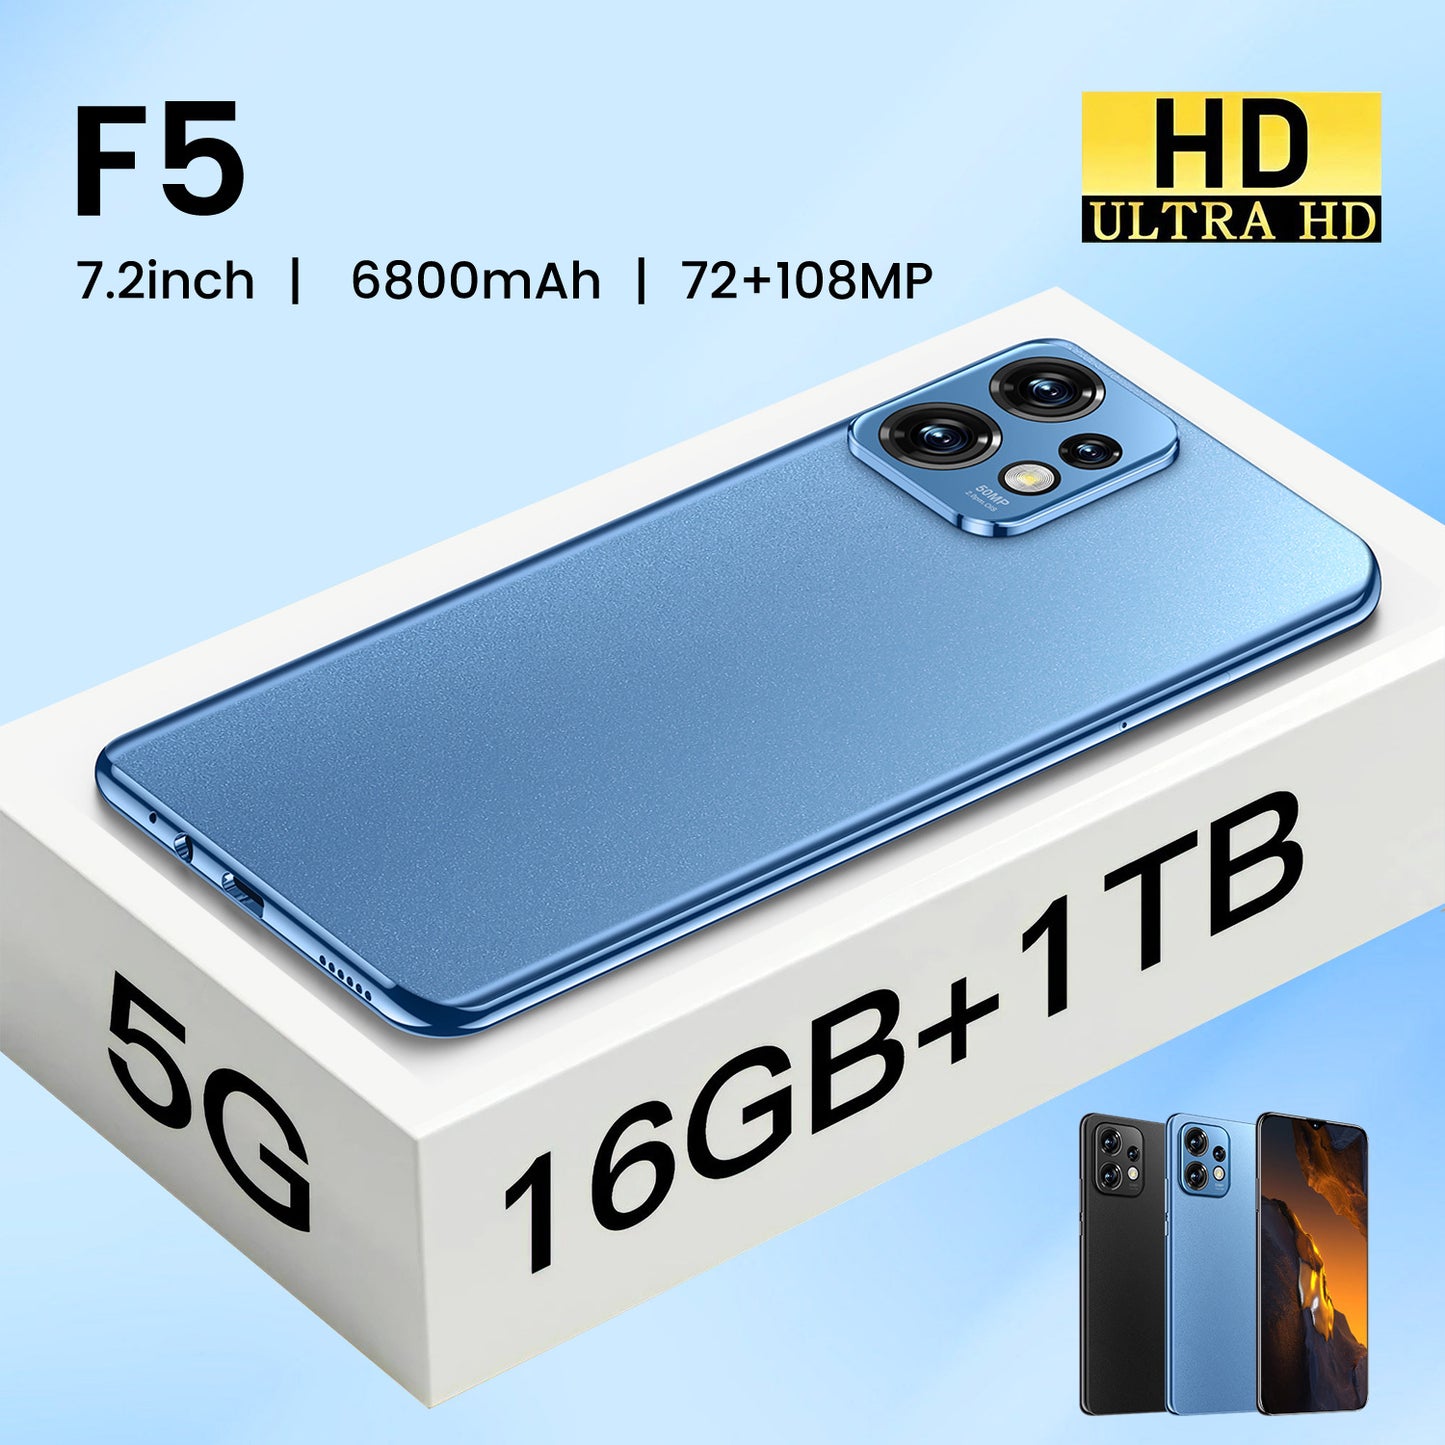 F5  7.2-inch large screen  16+1TB  Android smart 4G phone